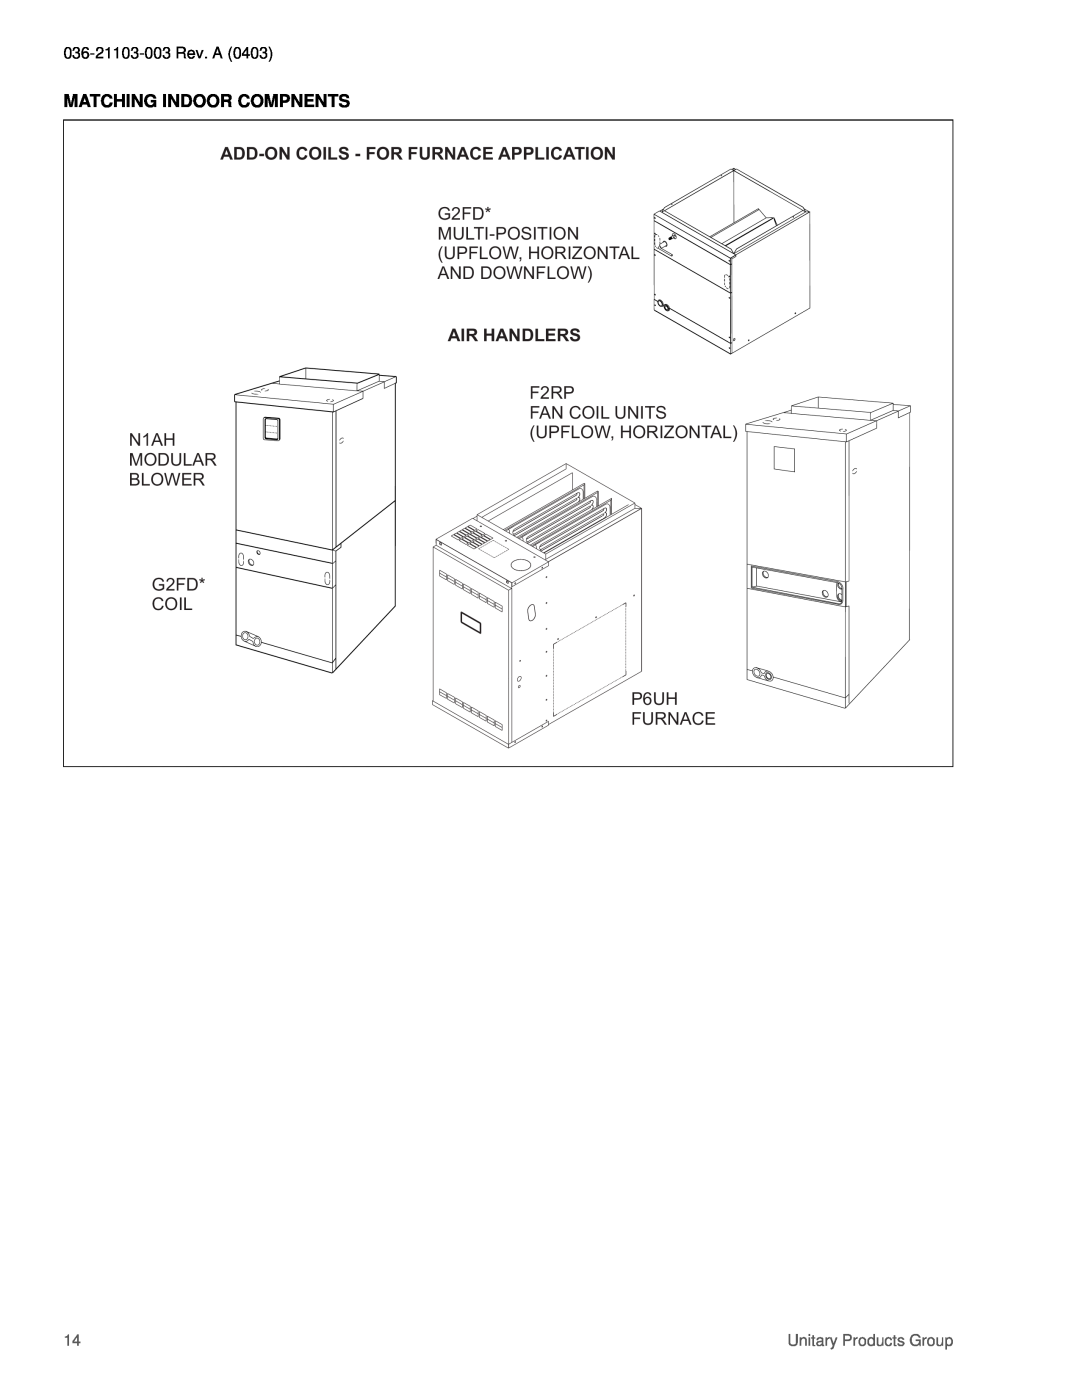 York 036-21103-003 specifications Matching Indoor Compnents, Add-Oncoils - For Furnace Application, Air Handlers 